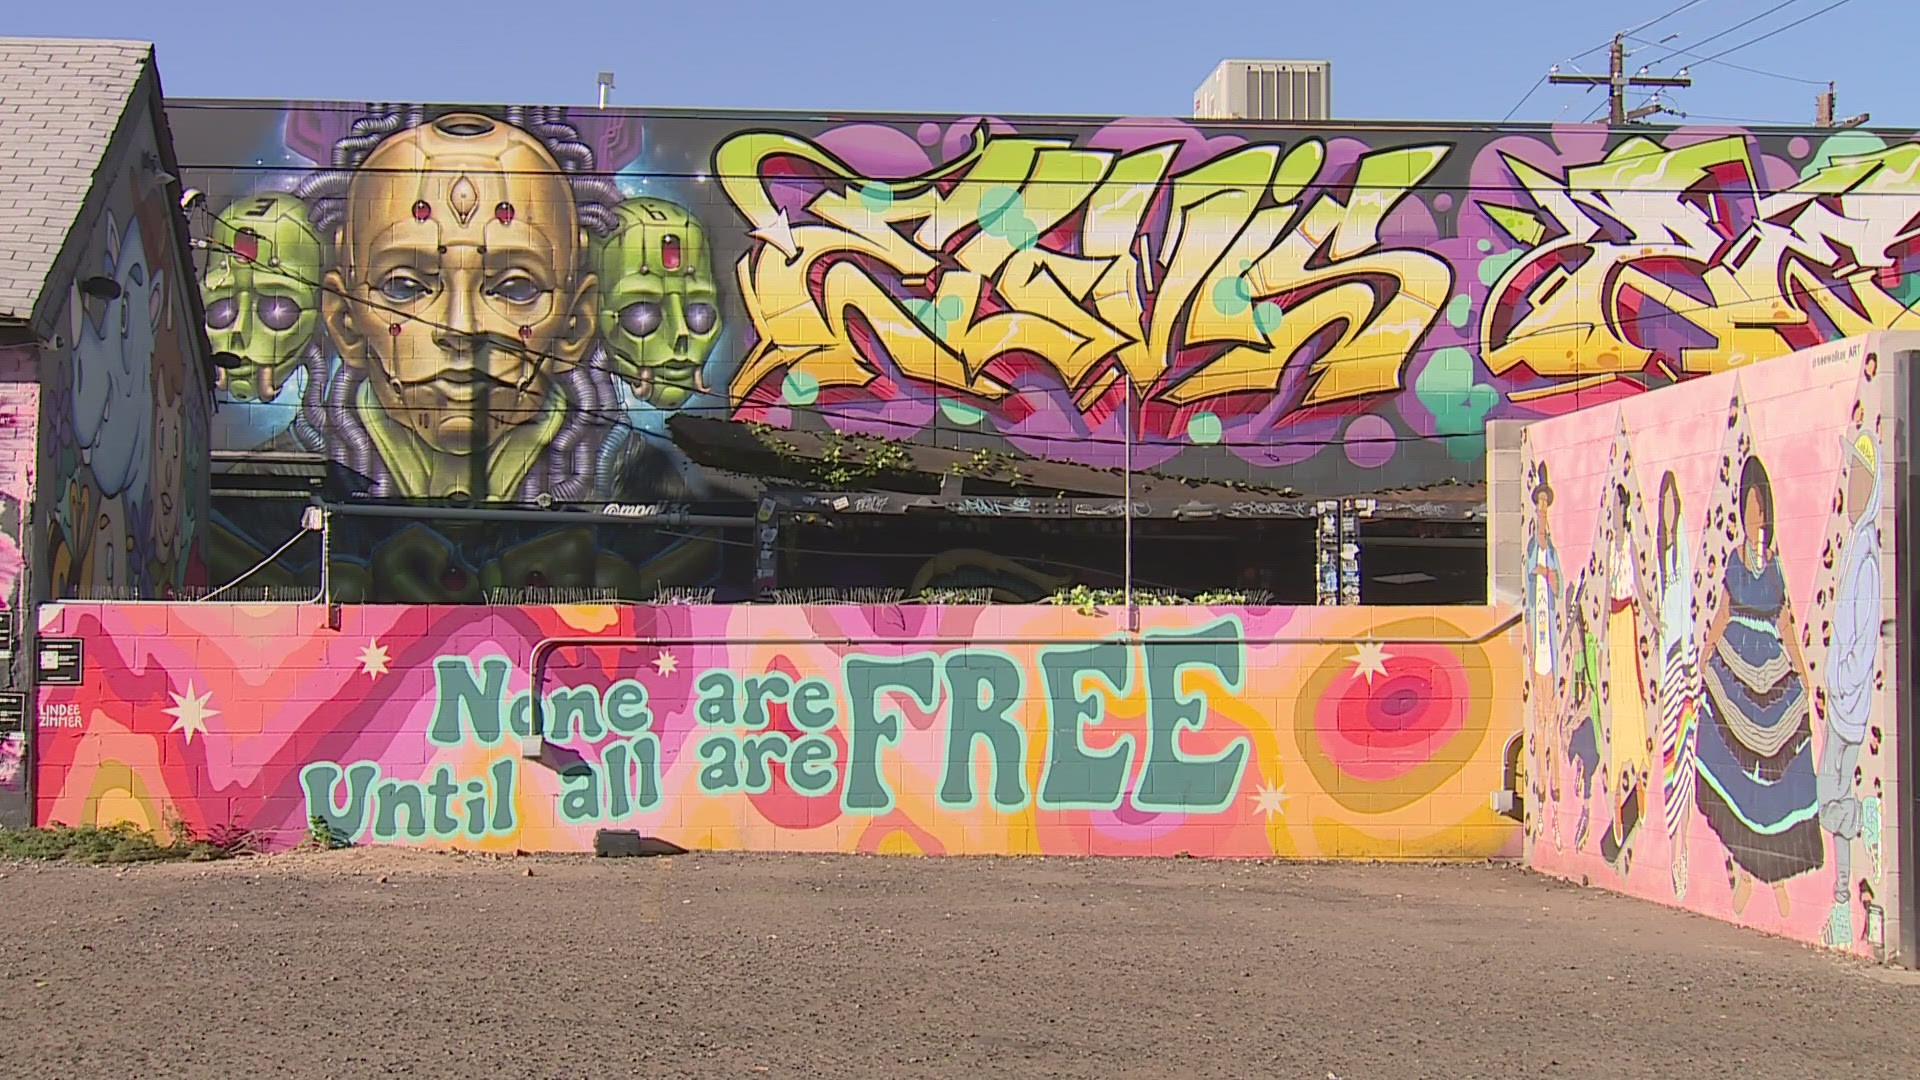 The streets of Denver are coming alive with art, and you have a chance to see many new murals all in one tour.